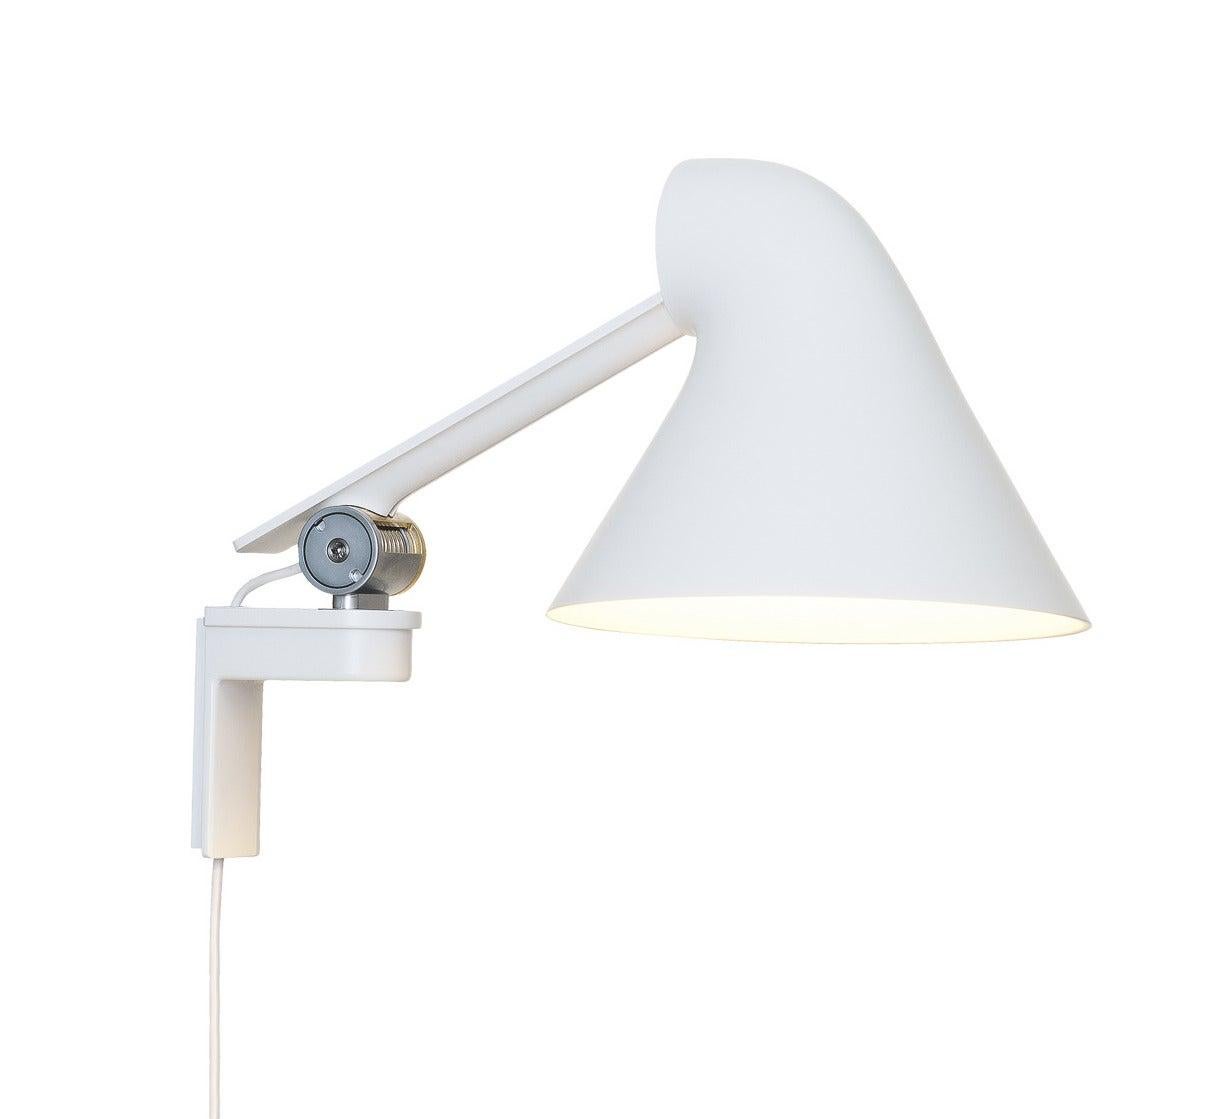 Louis Poulsen NJP Wall Long Lamp in White by Nendo, Oki Sato In New Condition For Sale In New York, NY